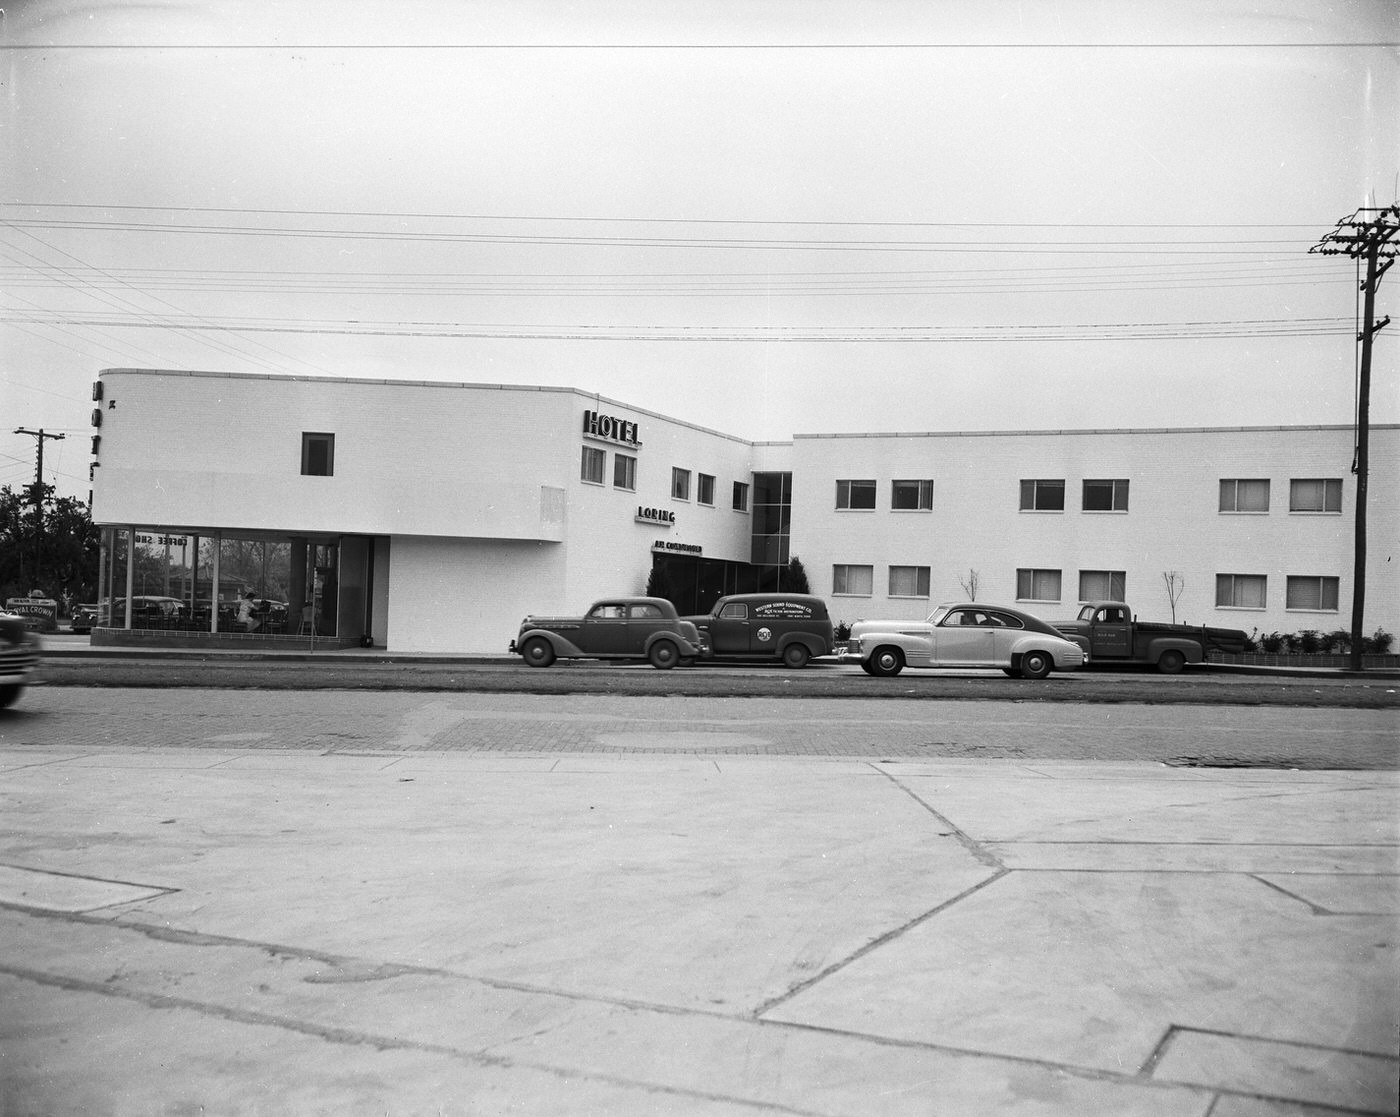 Loring Hotel on Camp Bowie Boulevard, Fort Worth, Texas, 1949